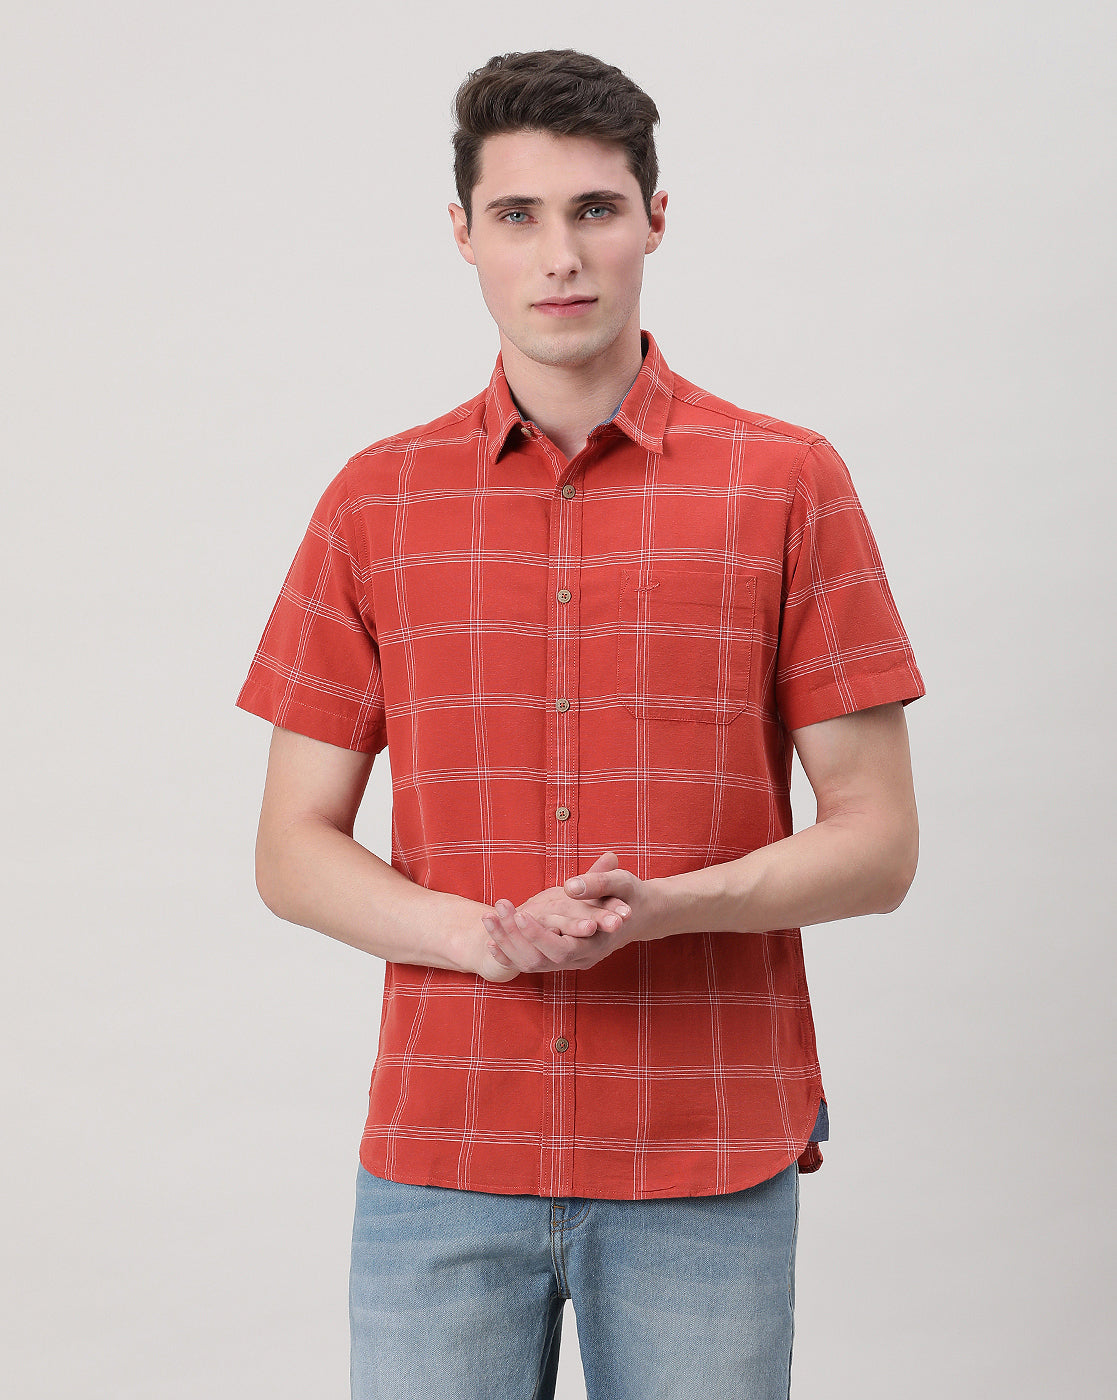 Casual Red Half Sleeve Comfort Fit Checks Shirt with Collar for Men